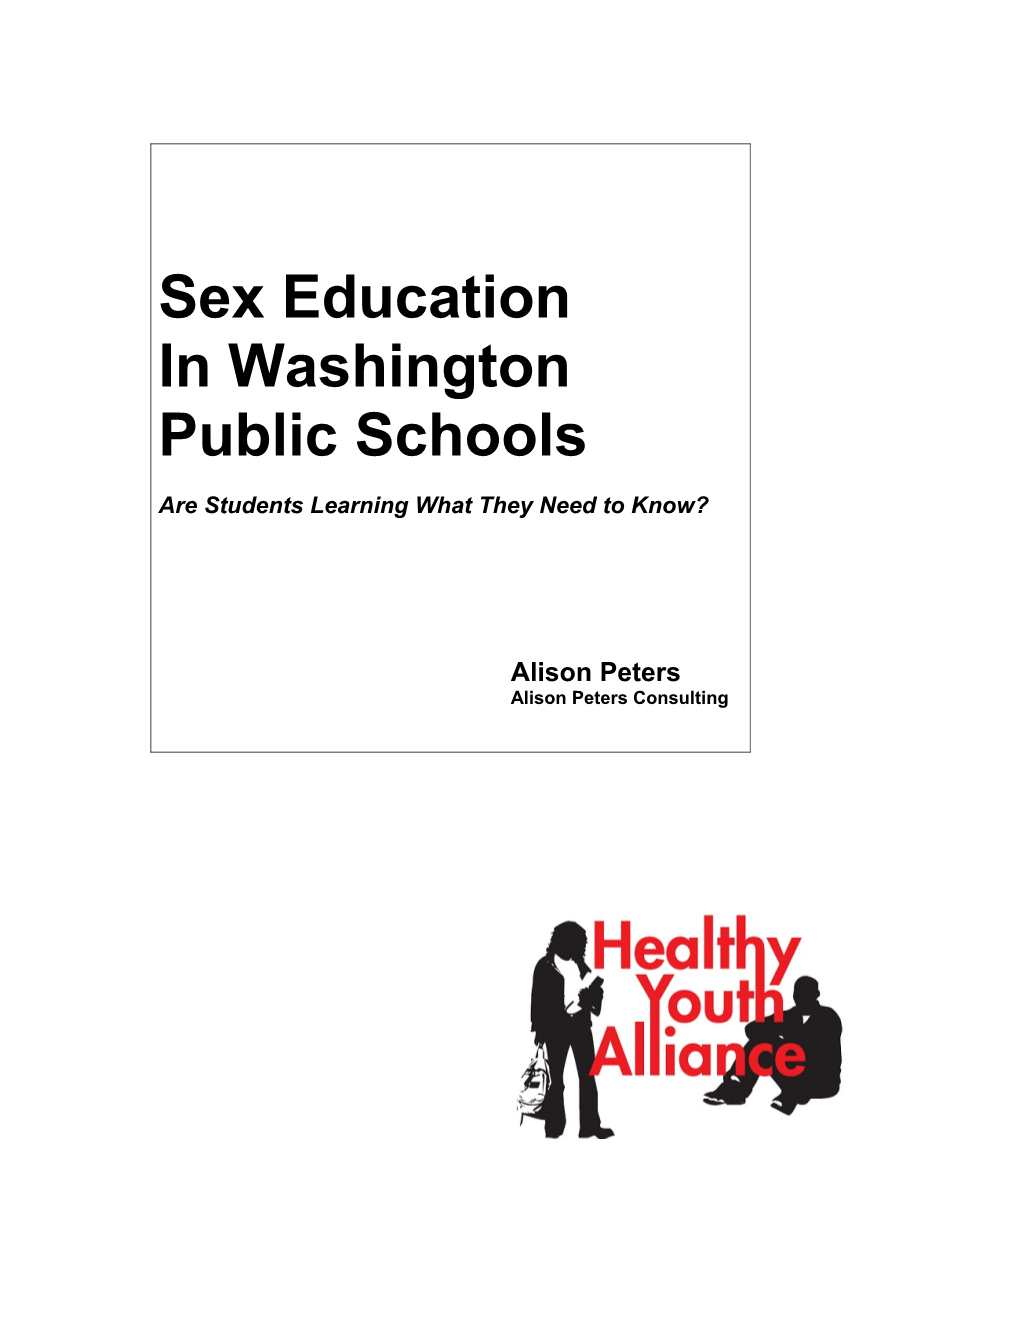 Are Public Schools Teaching Effective and Appropriate Sex Education